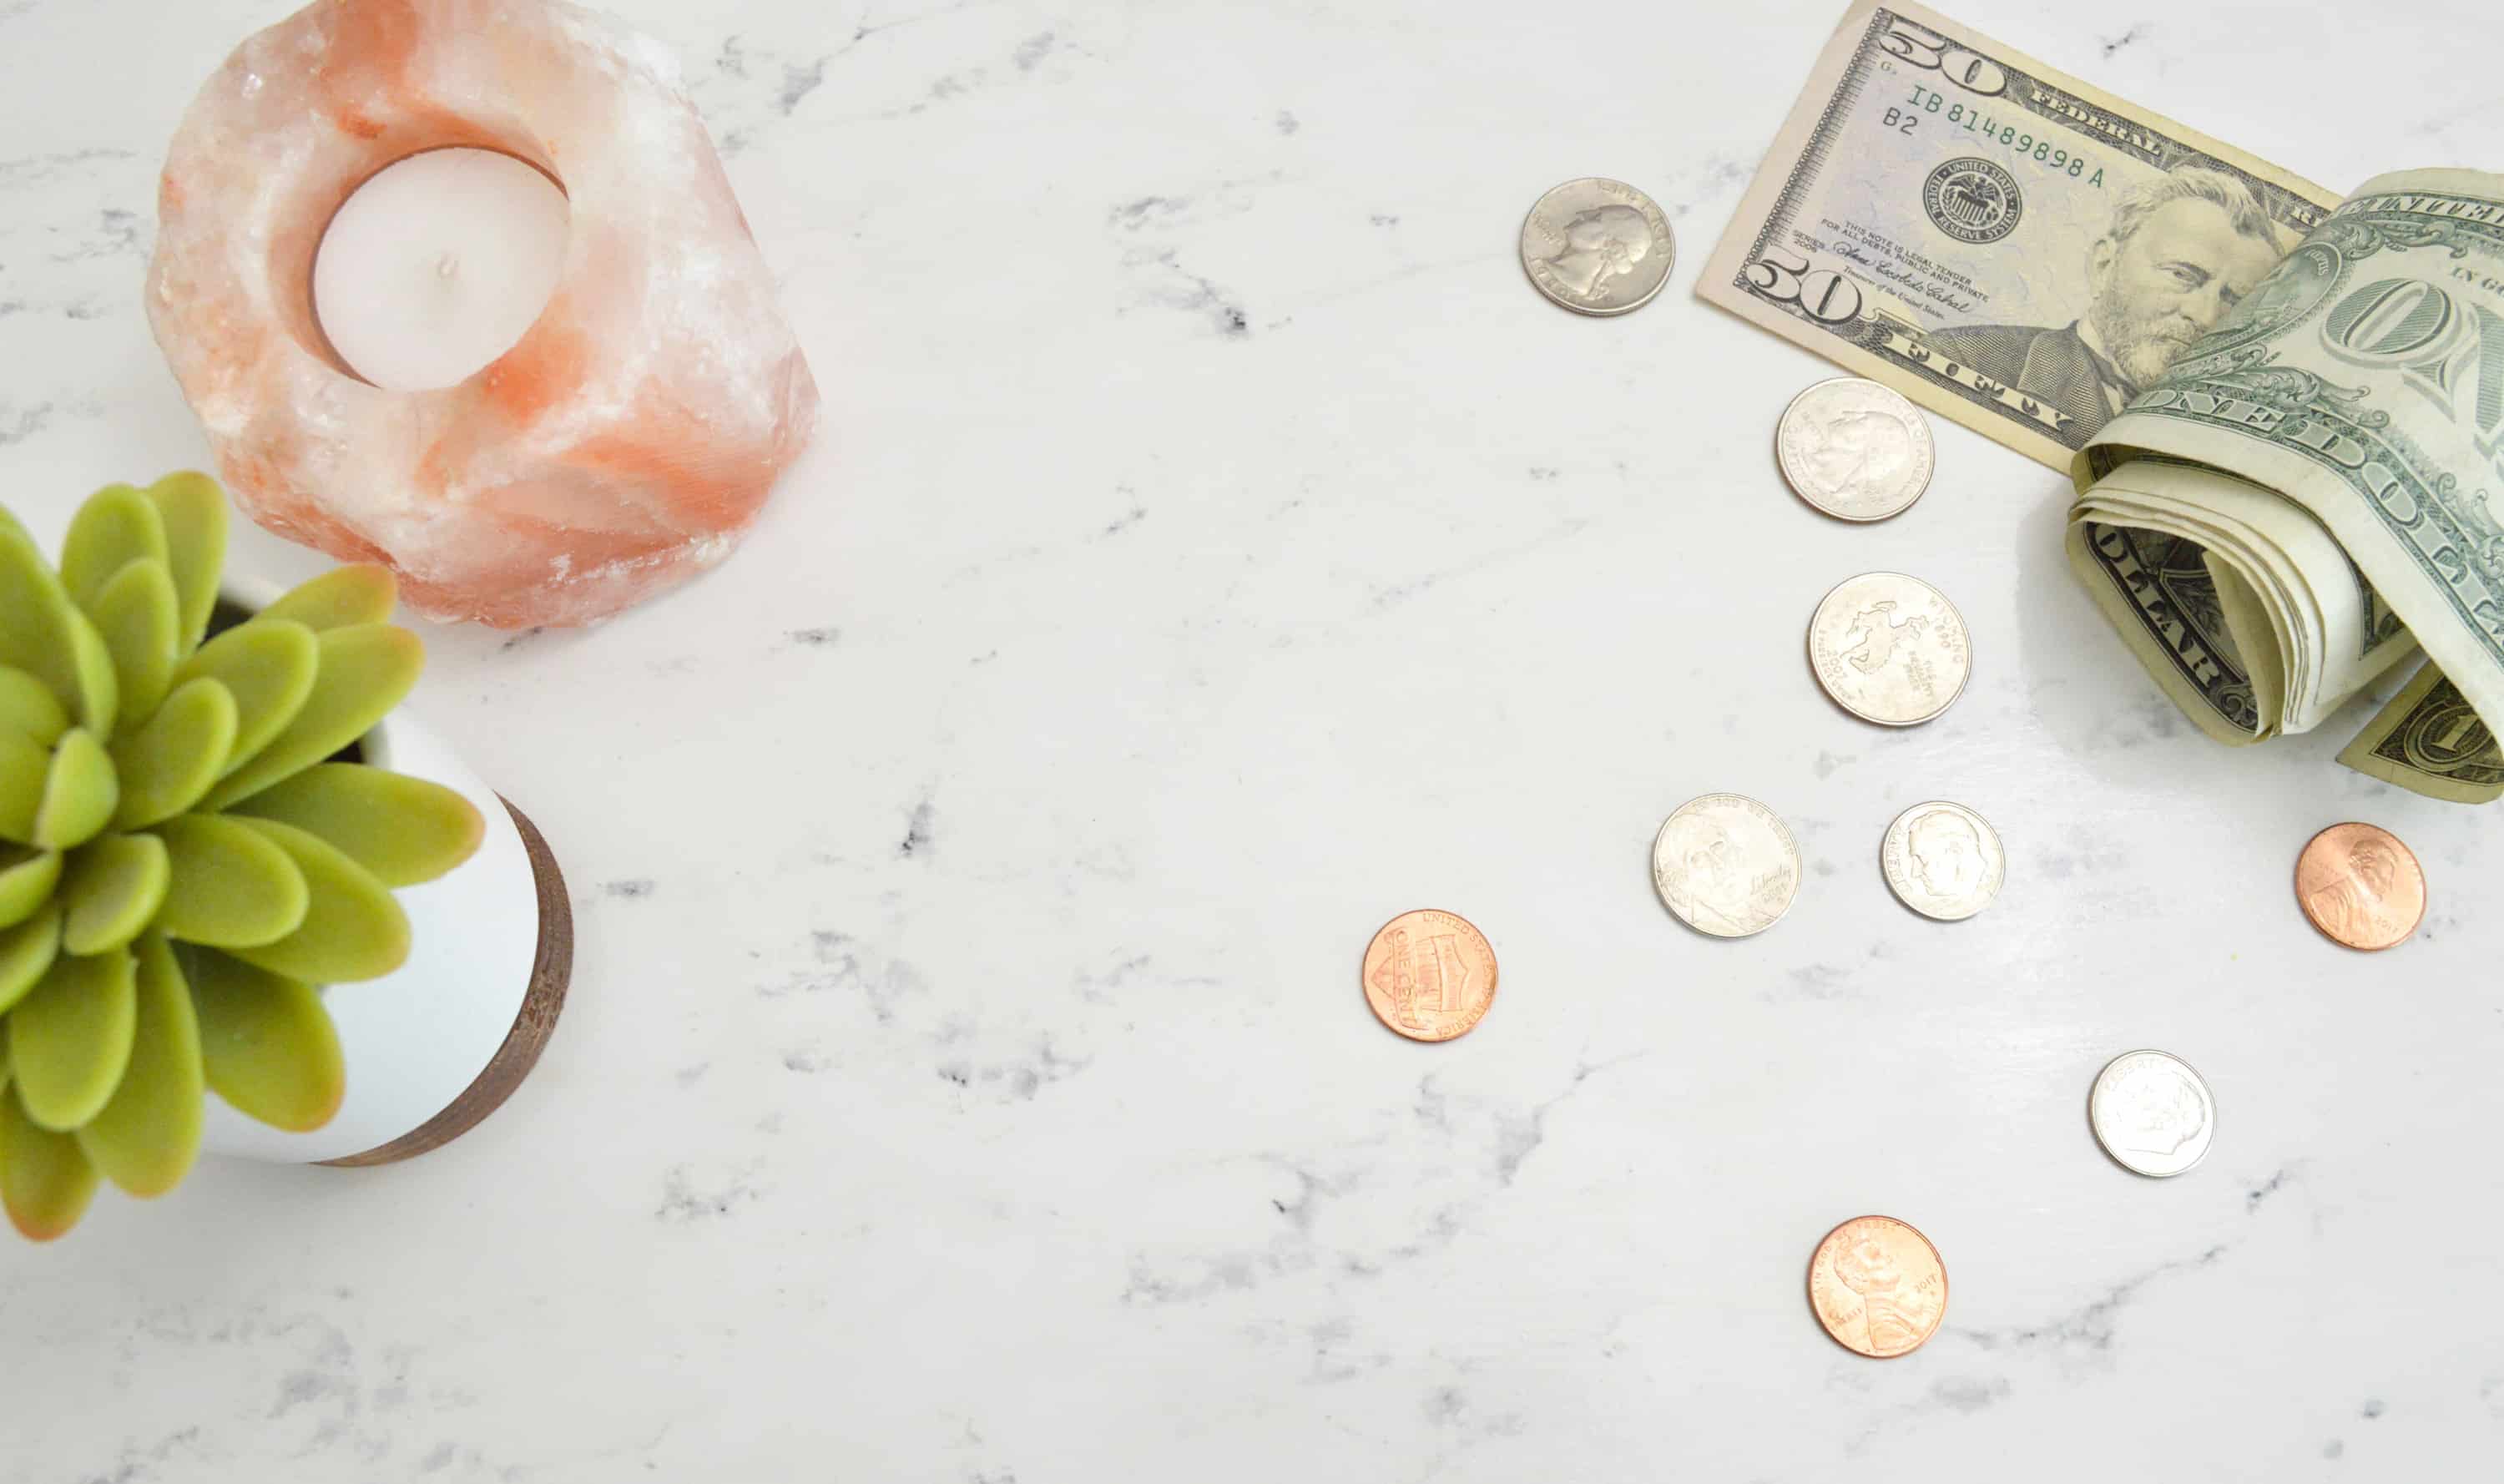 A picture of a marble table top with loose change and dollar bills spread about.